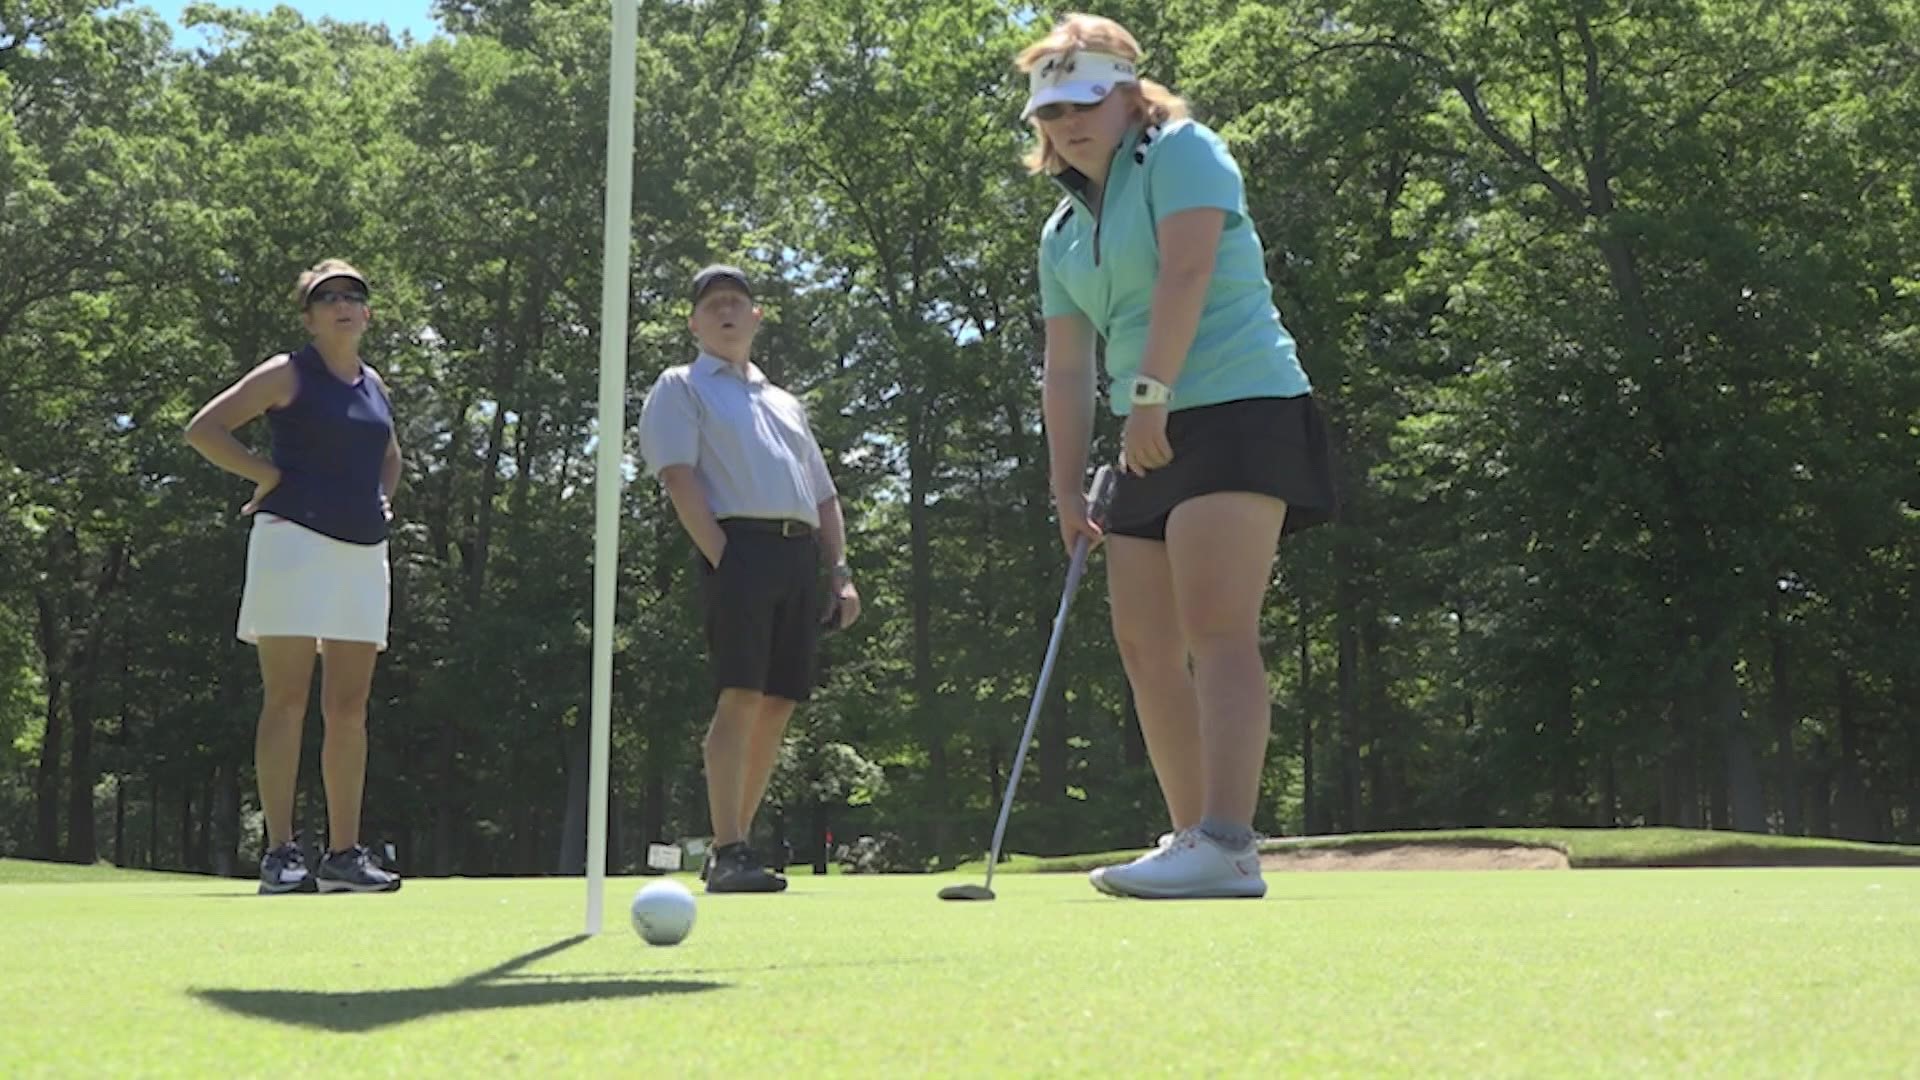 22-year-old Amy Bockerstette has made headlines around the world as the first person with Down syndrome to receive an athletic scholarship to attend college.